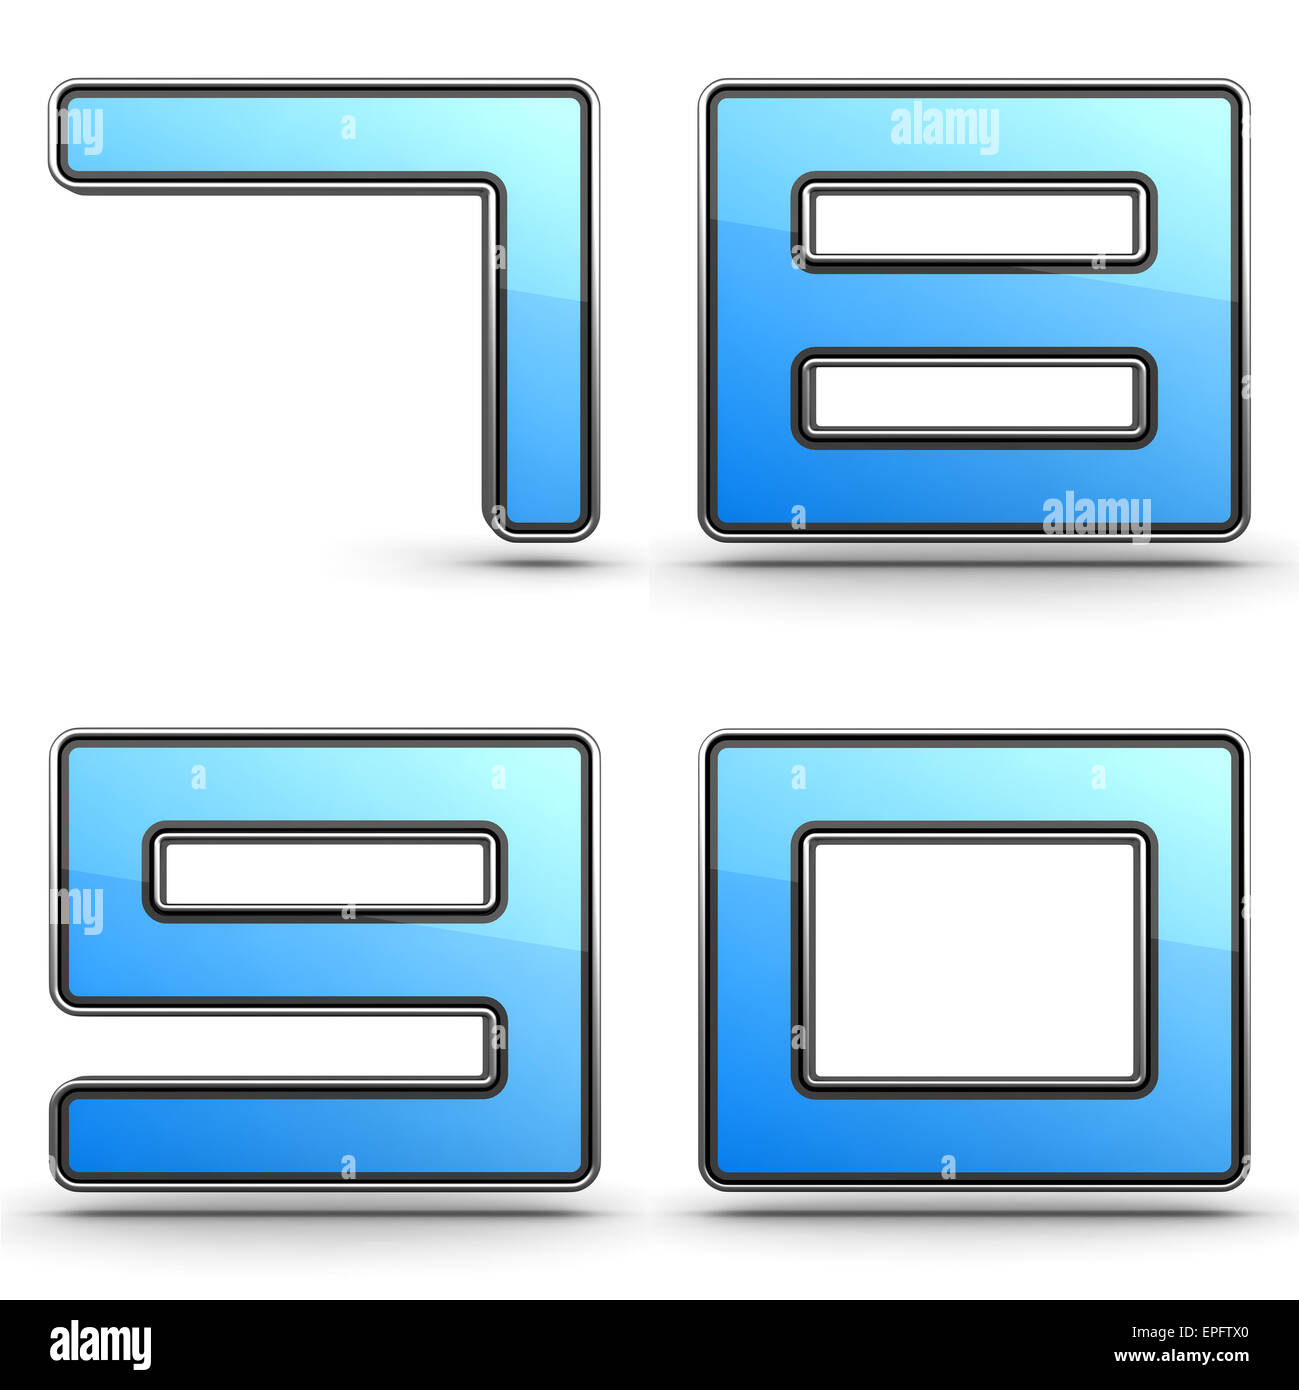 Digits 7,8,9,0 - Set of 3D Digits in Touchpad Style. Stock Photo